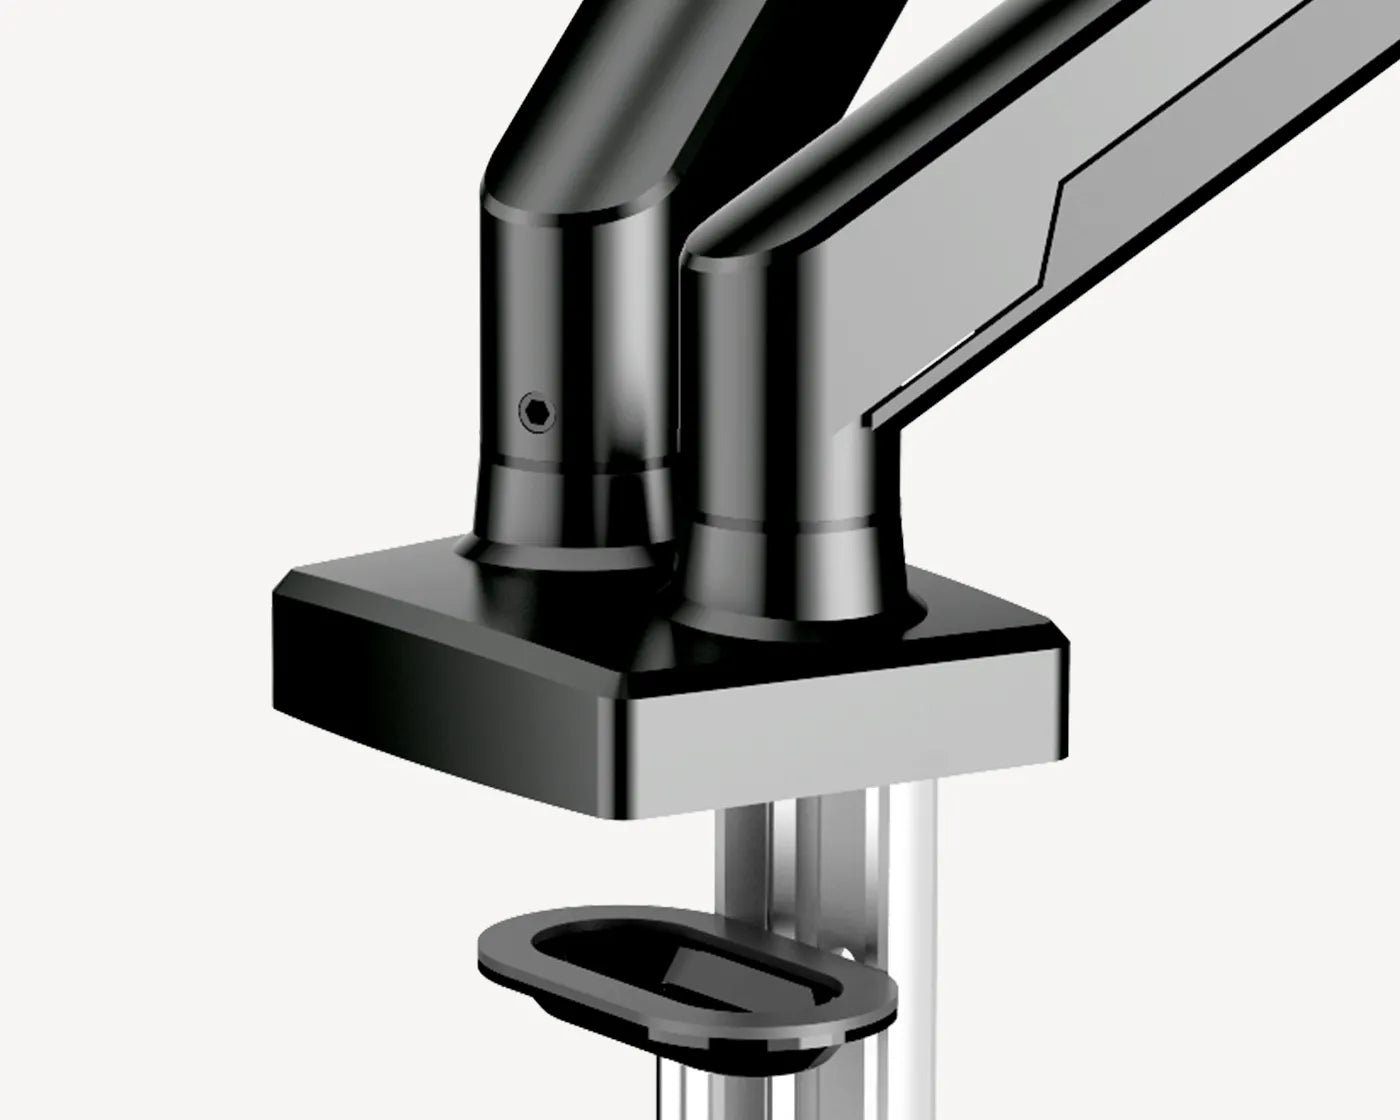 Flujo XTFlex Dual monitor arm's clamp and grommet mounting system for secure desk attachment